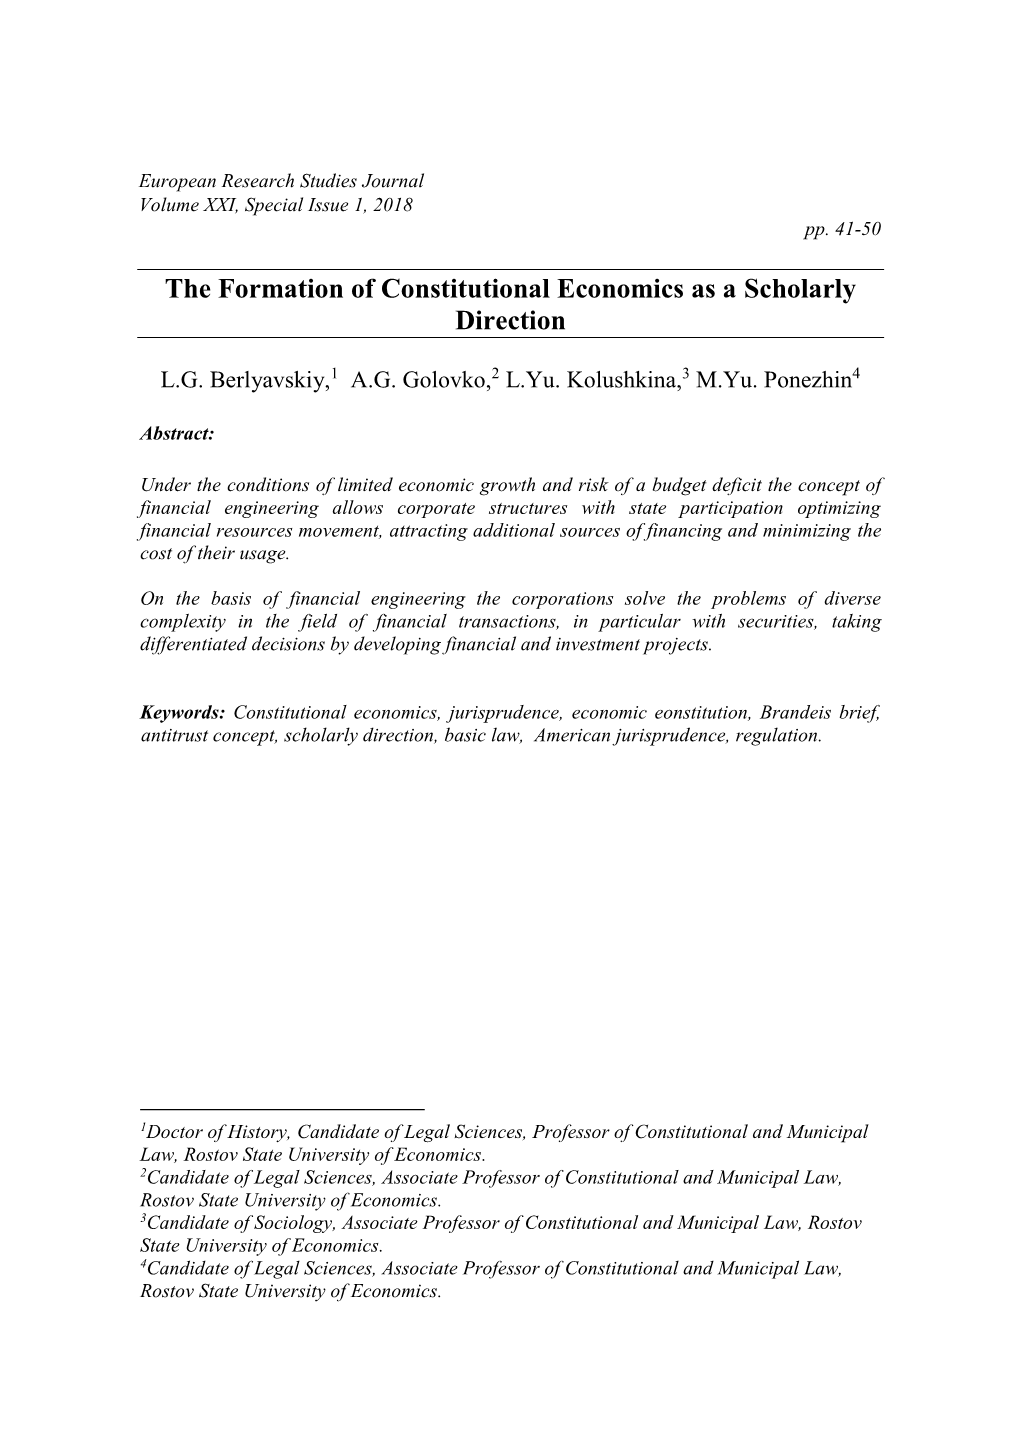 The Formation of Constitutional Economics As a Scholarly Direction